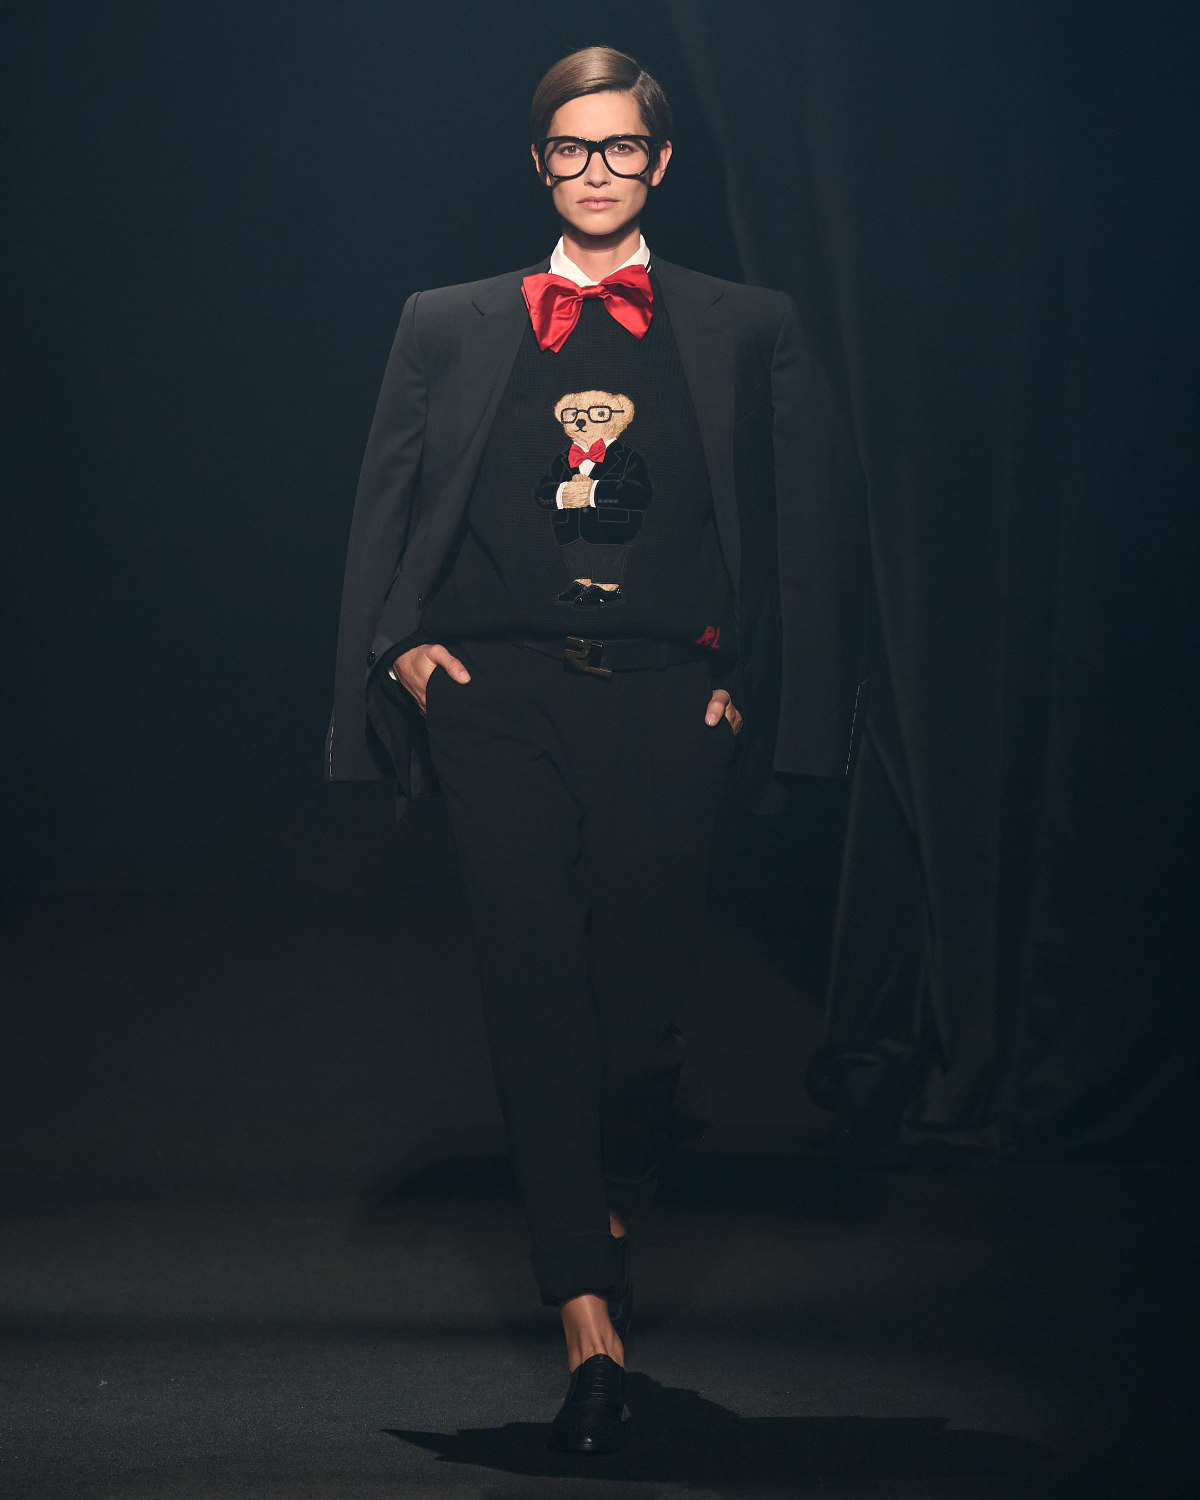 Love Brings Love Tribute Show Brings Together The World Of Fashion In Honor And Memory Of Alber Elb